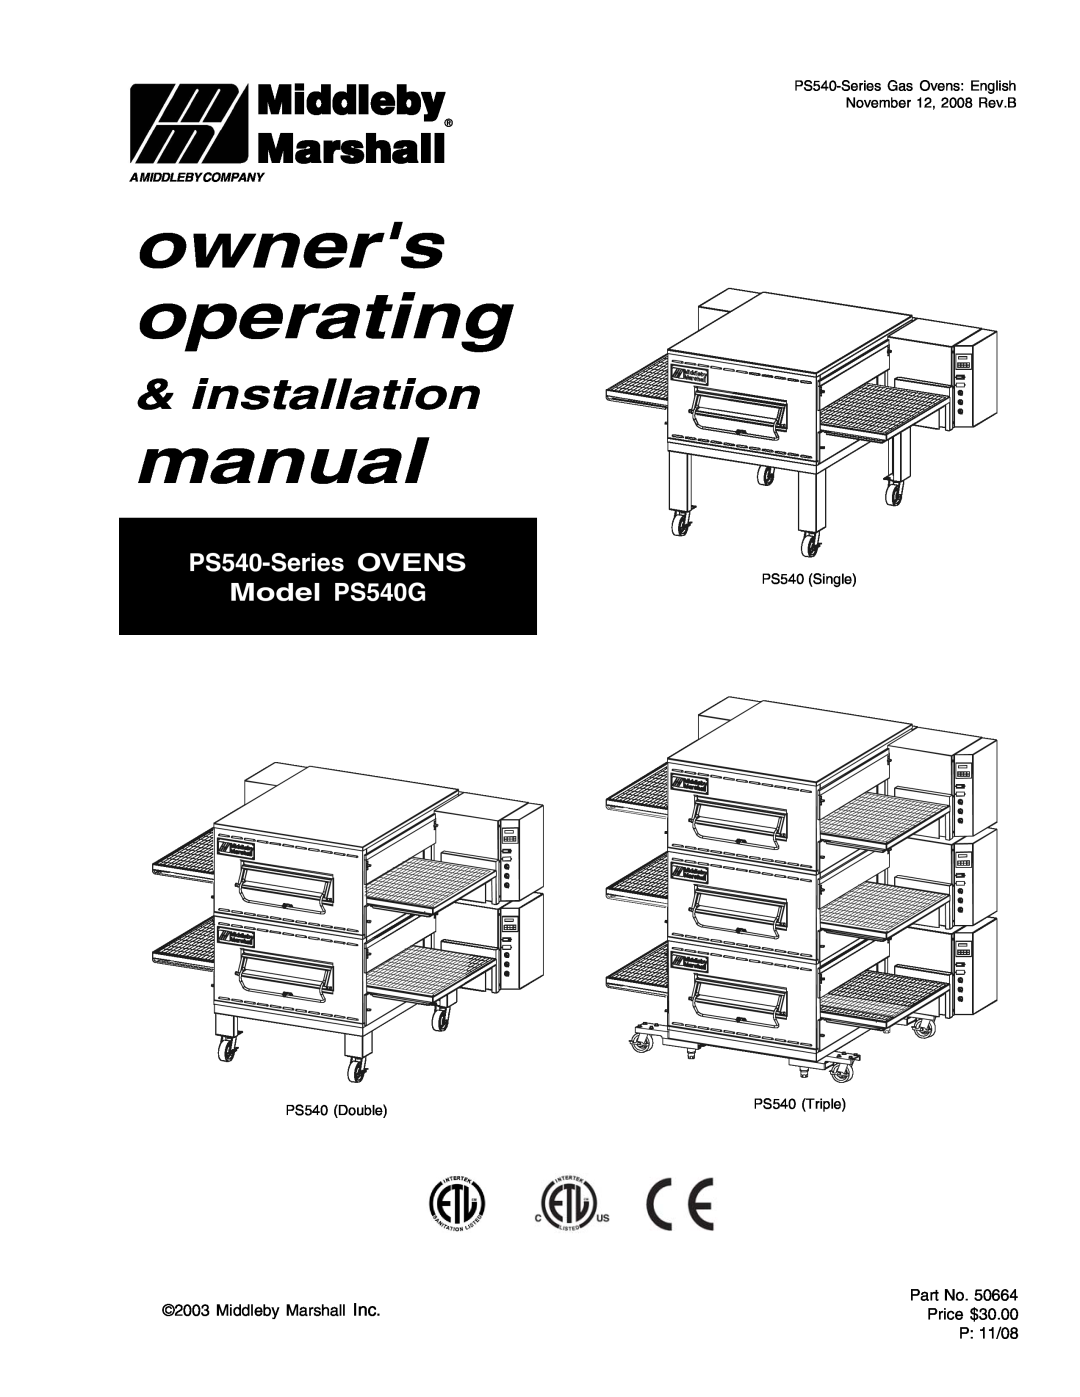 Middleby Marshall installation manual owners operating, Middleby, Marshall, PS540-Series OVENS Model PS540G 